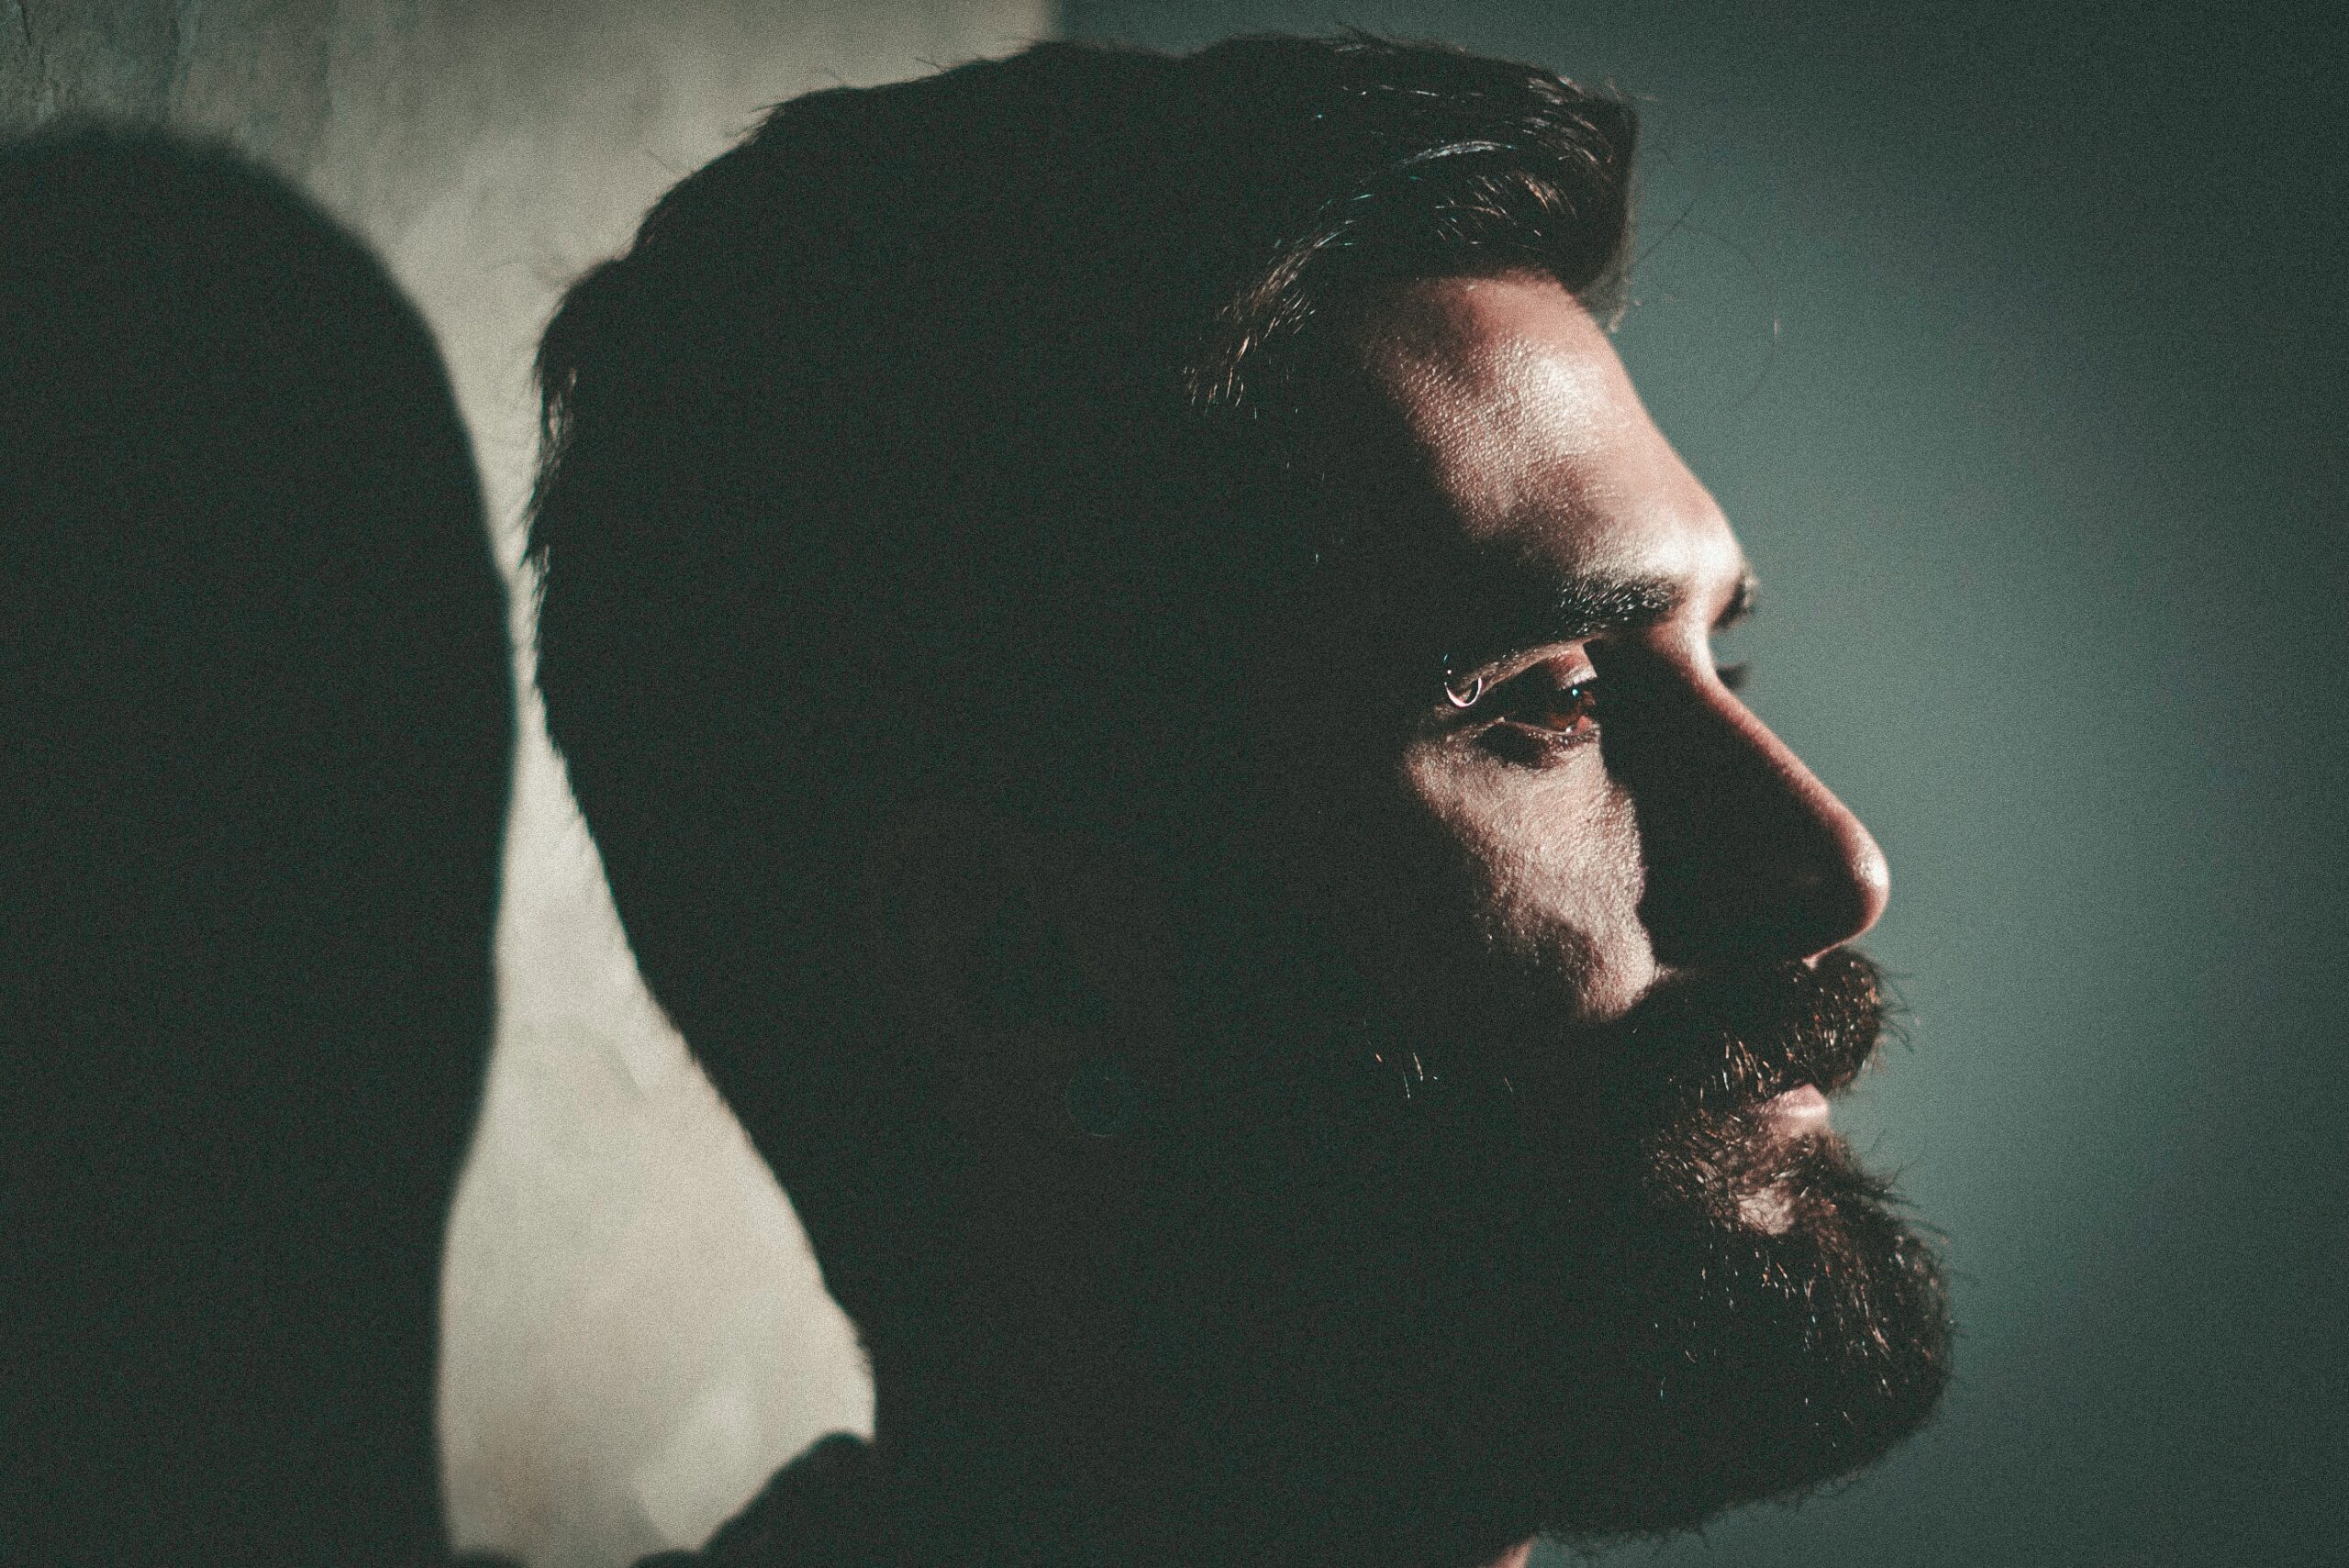 Profile of a man with a beard